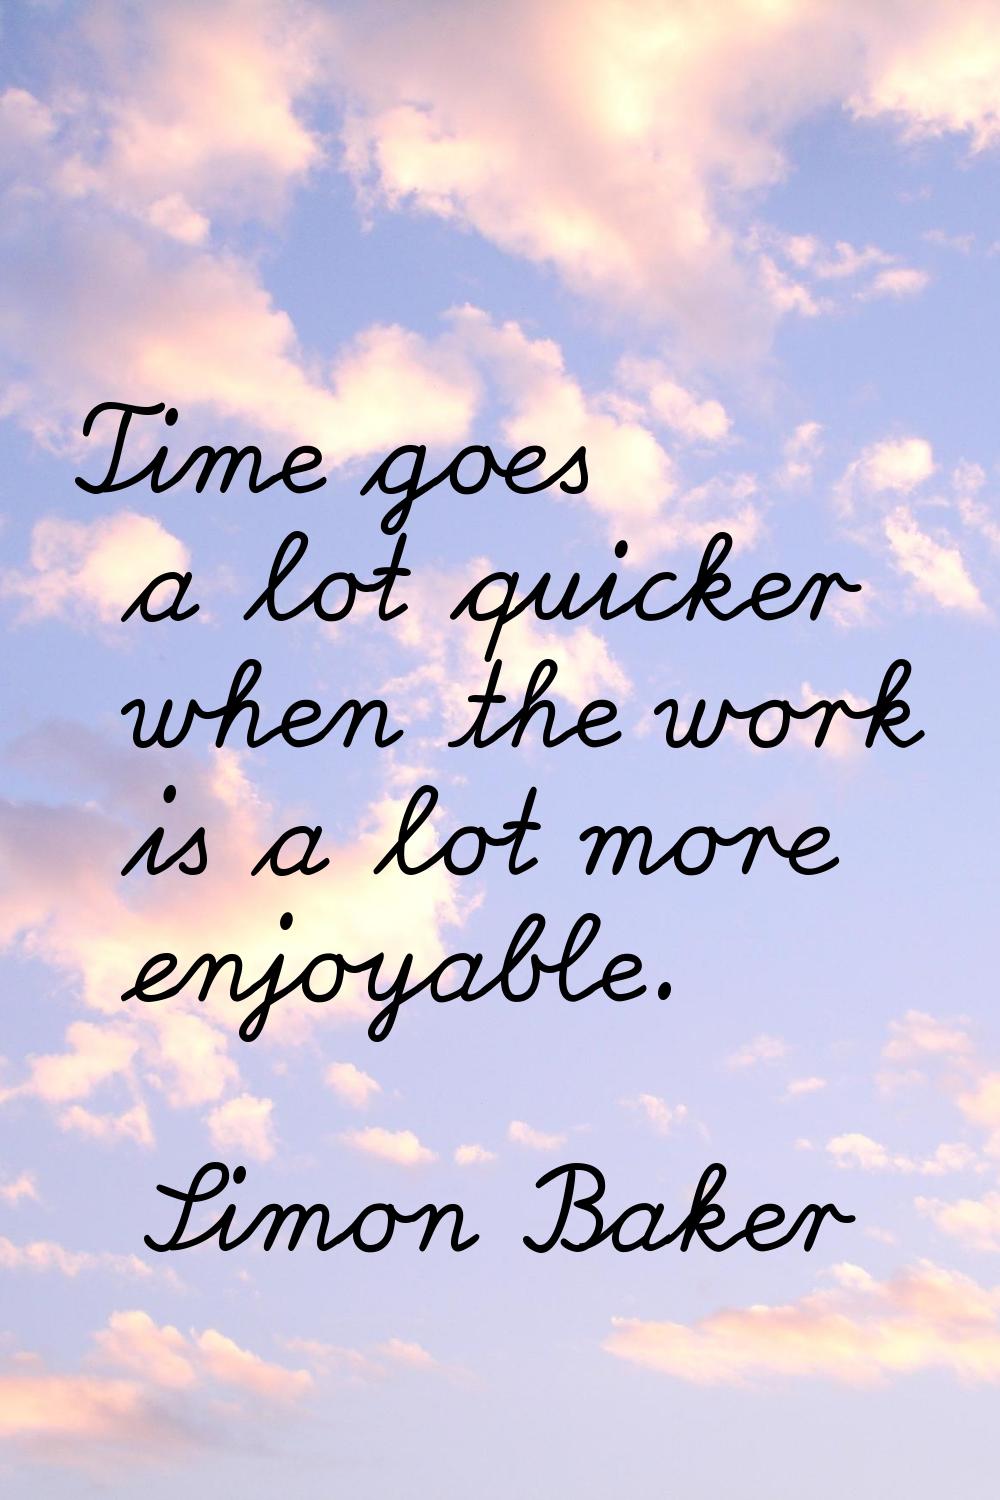 Time goes a lot quicker when the work is a lot more enjoyable.